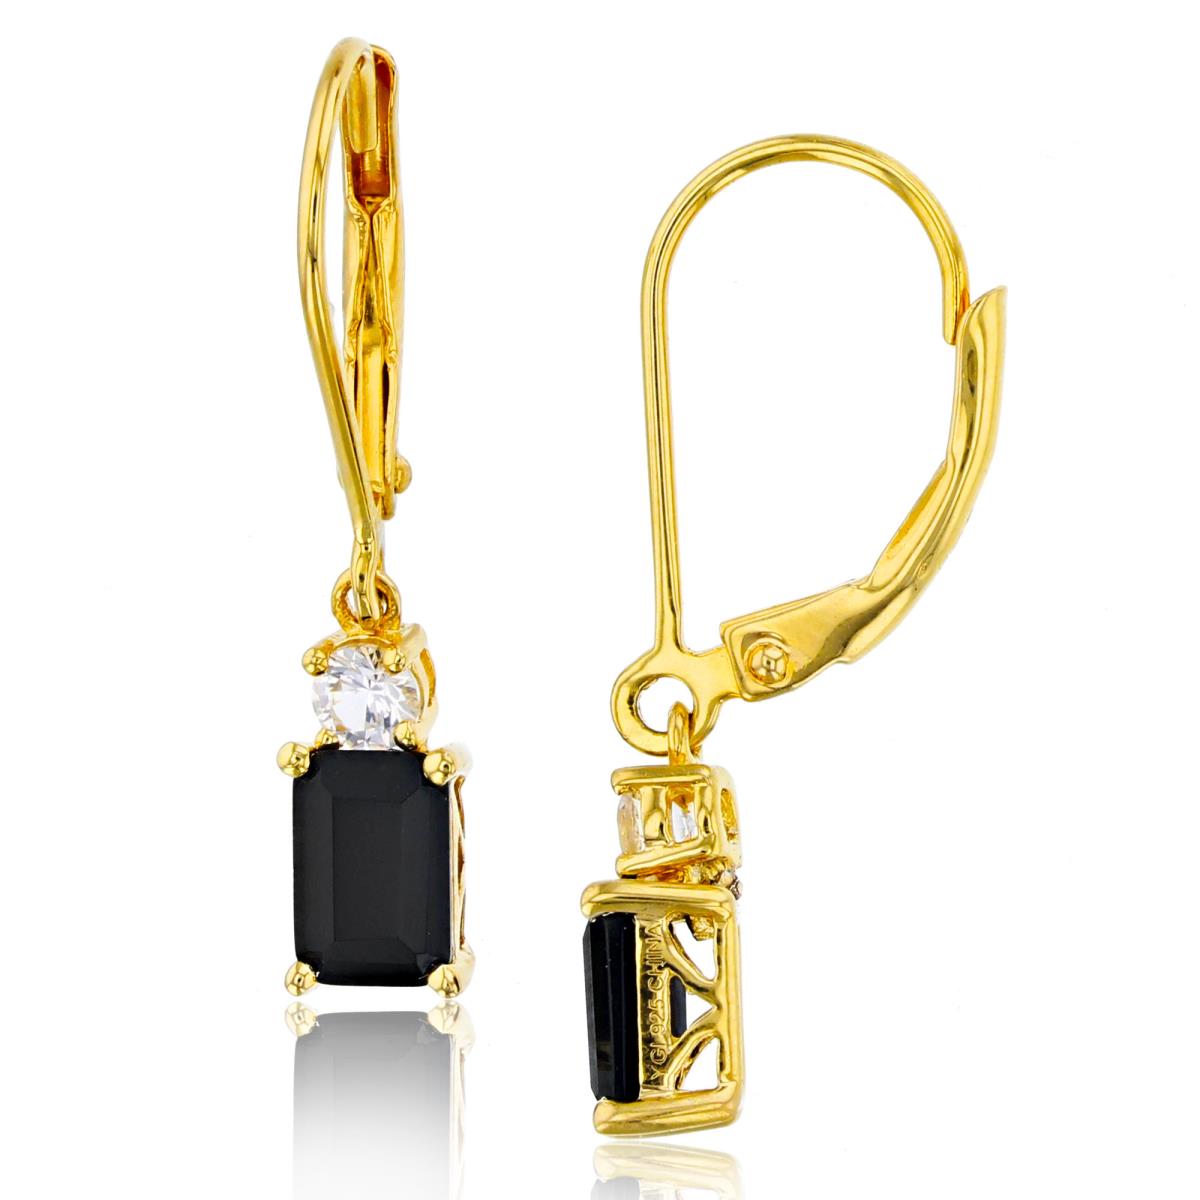 Silver Sterling+1Micron 14K Yellow Gold 6x4mm Oct Onyx & 3mm Rnd White Topaz Lever Back Earrings